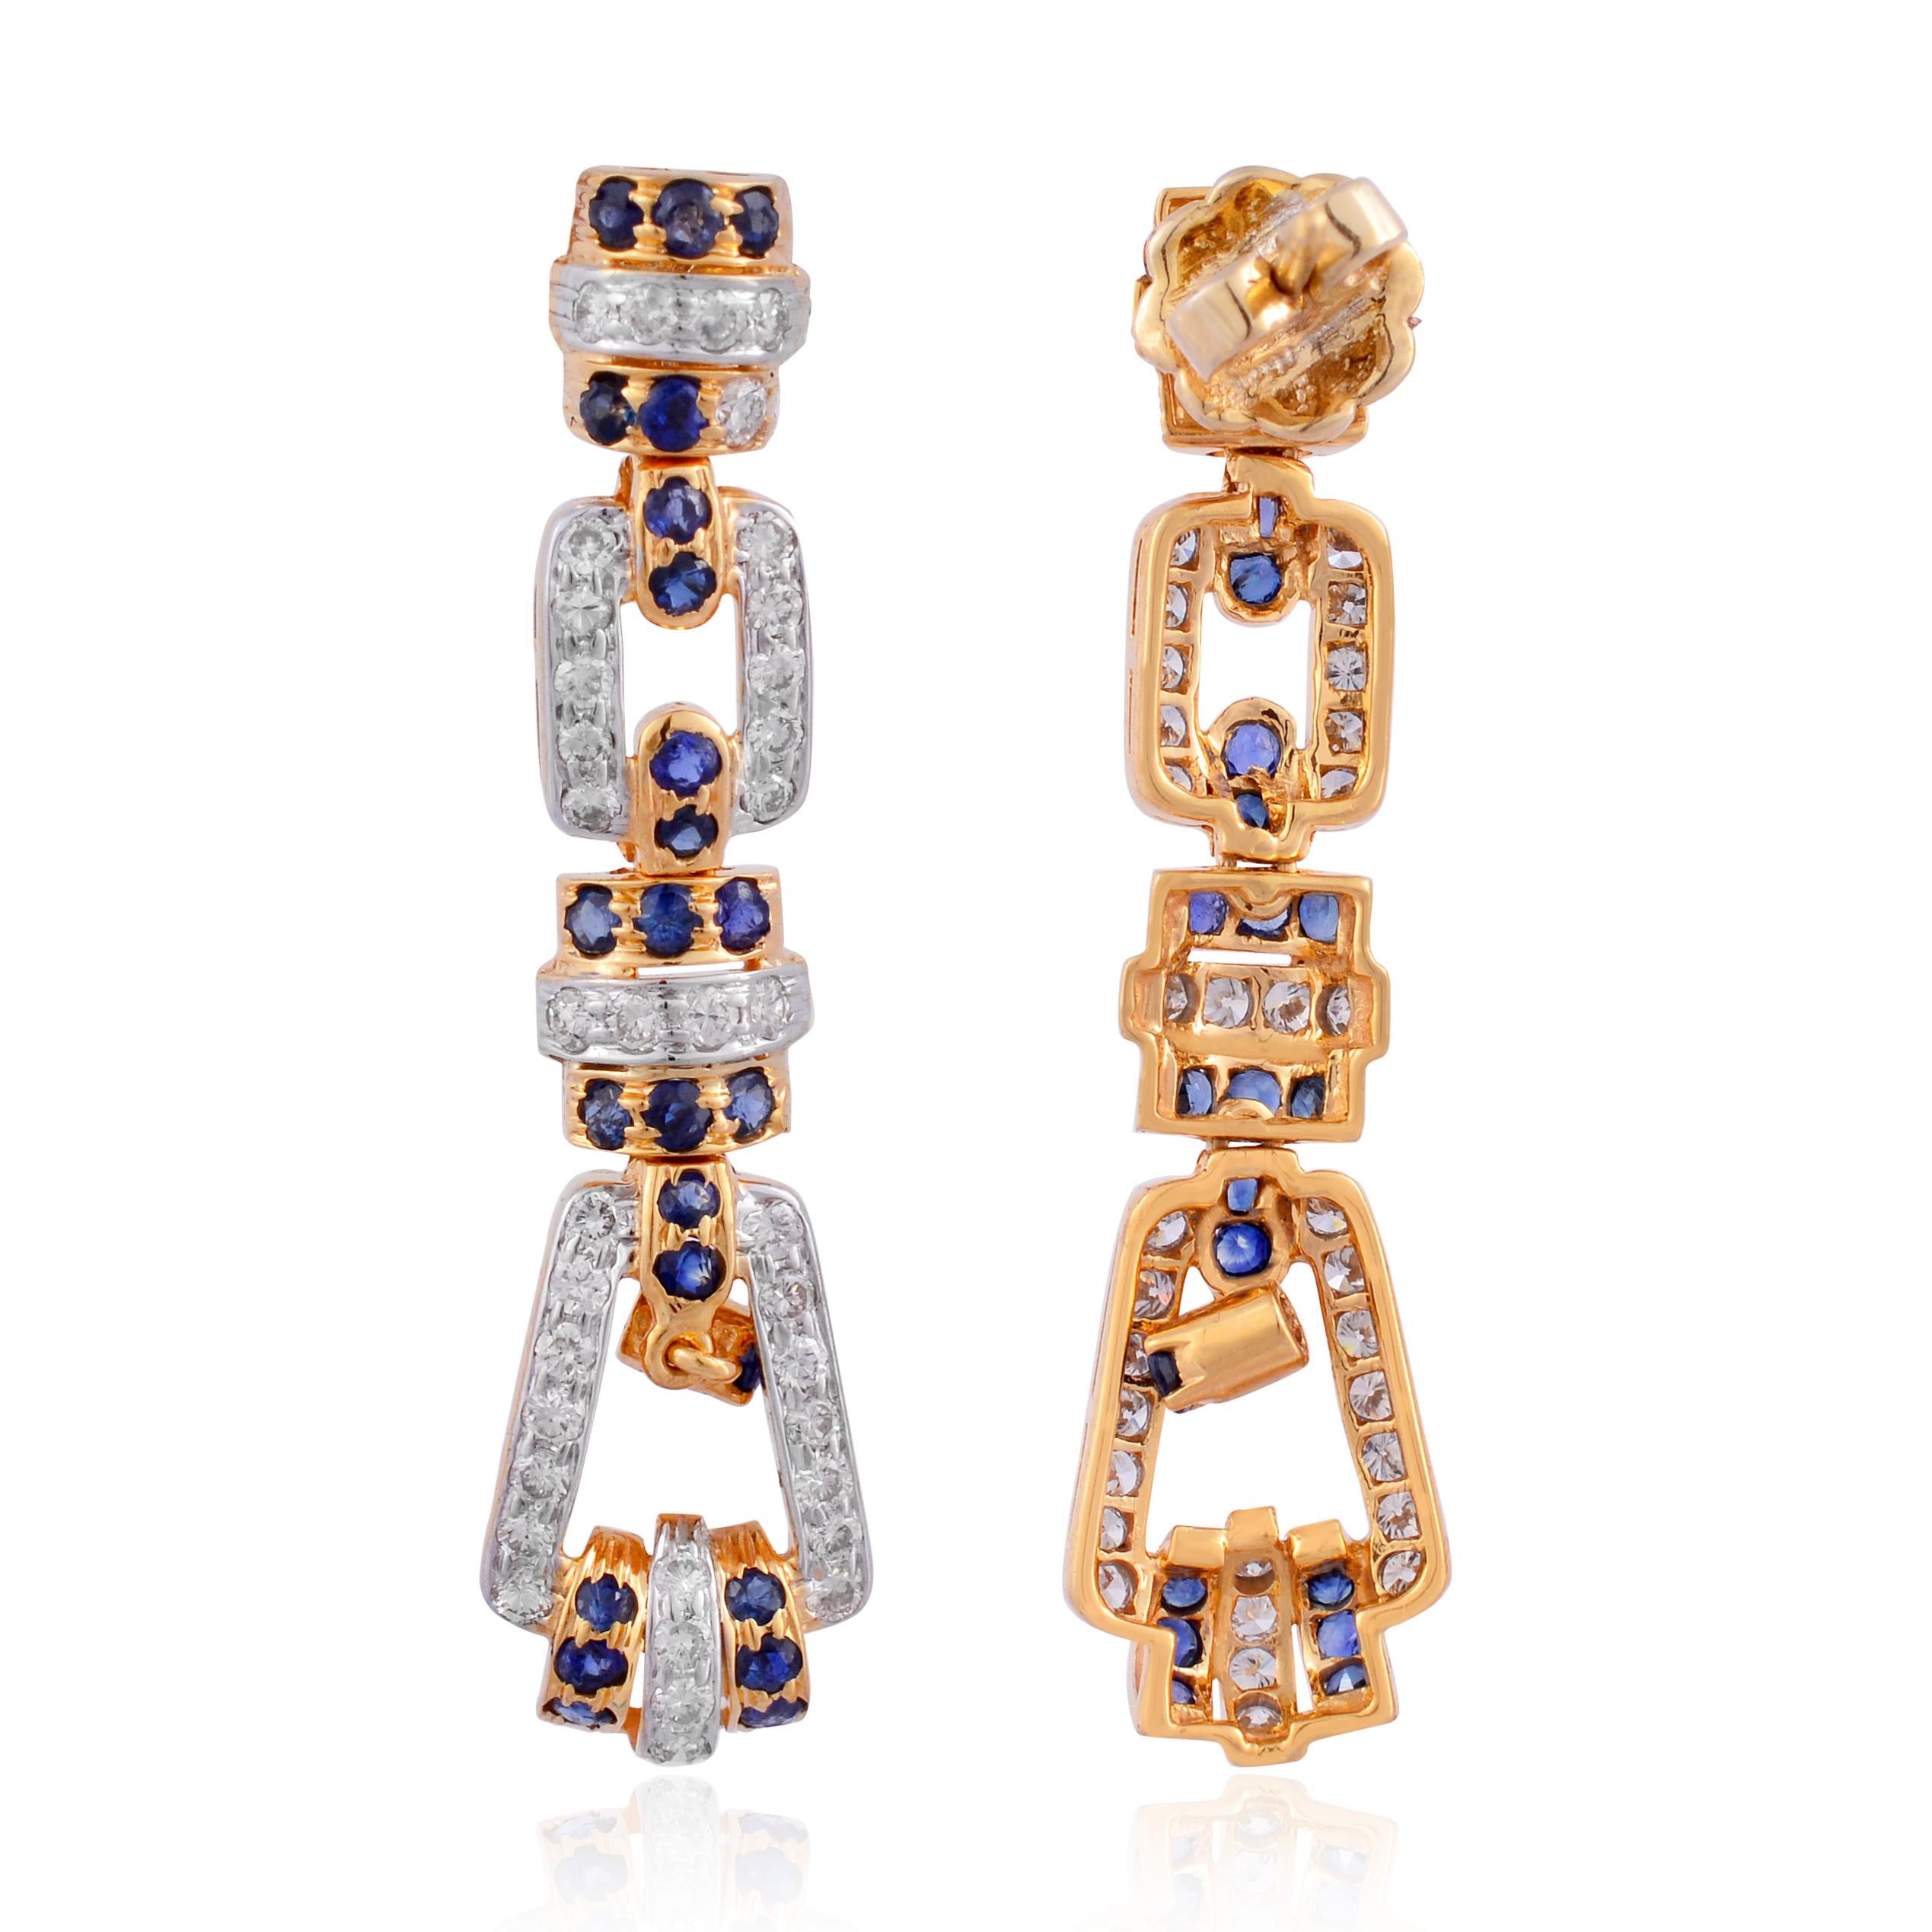 Item Code :- CN-16541A
Gross Wt. :- 6.68 gram
18k Solid Yellow Gold Wt. :- 6.43 gram
Natural Diamond Wt. :- 0.65 Ct.
Blue Sapphire Wt. :- 0.60 Ct.
Earrings Size :- 39 x 10 mm

✦ Sizing
.....................
We can adjust most items to fit your